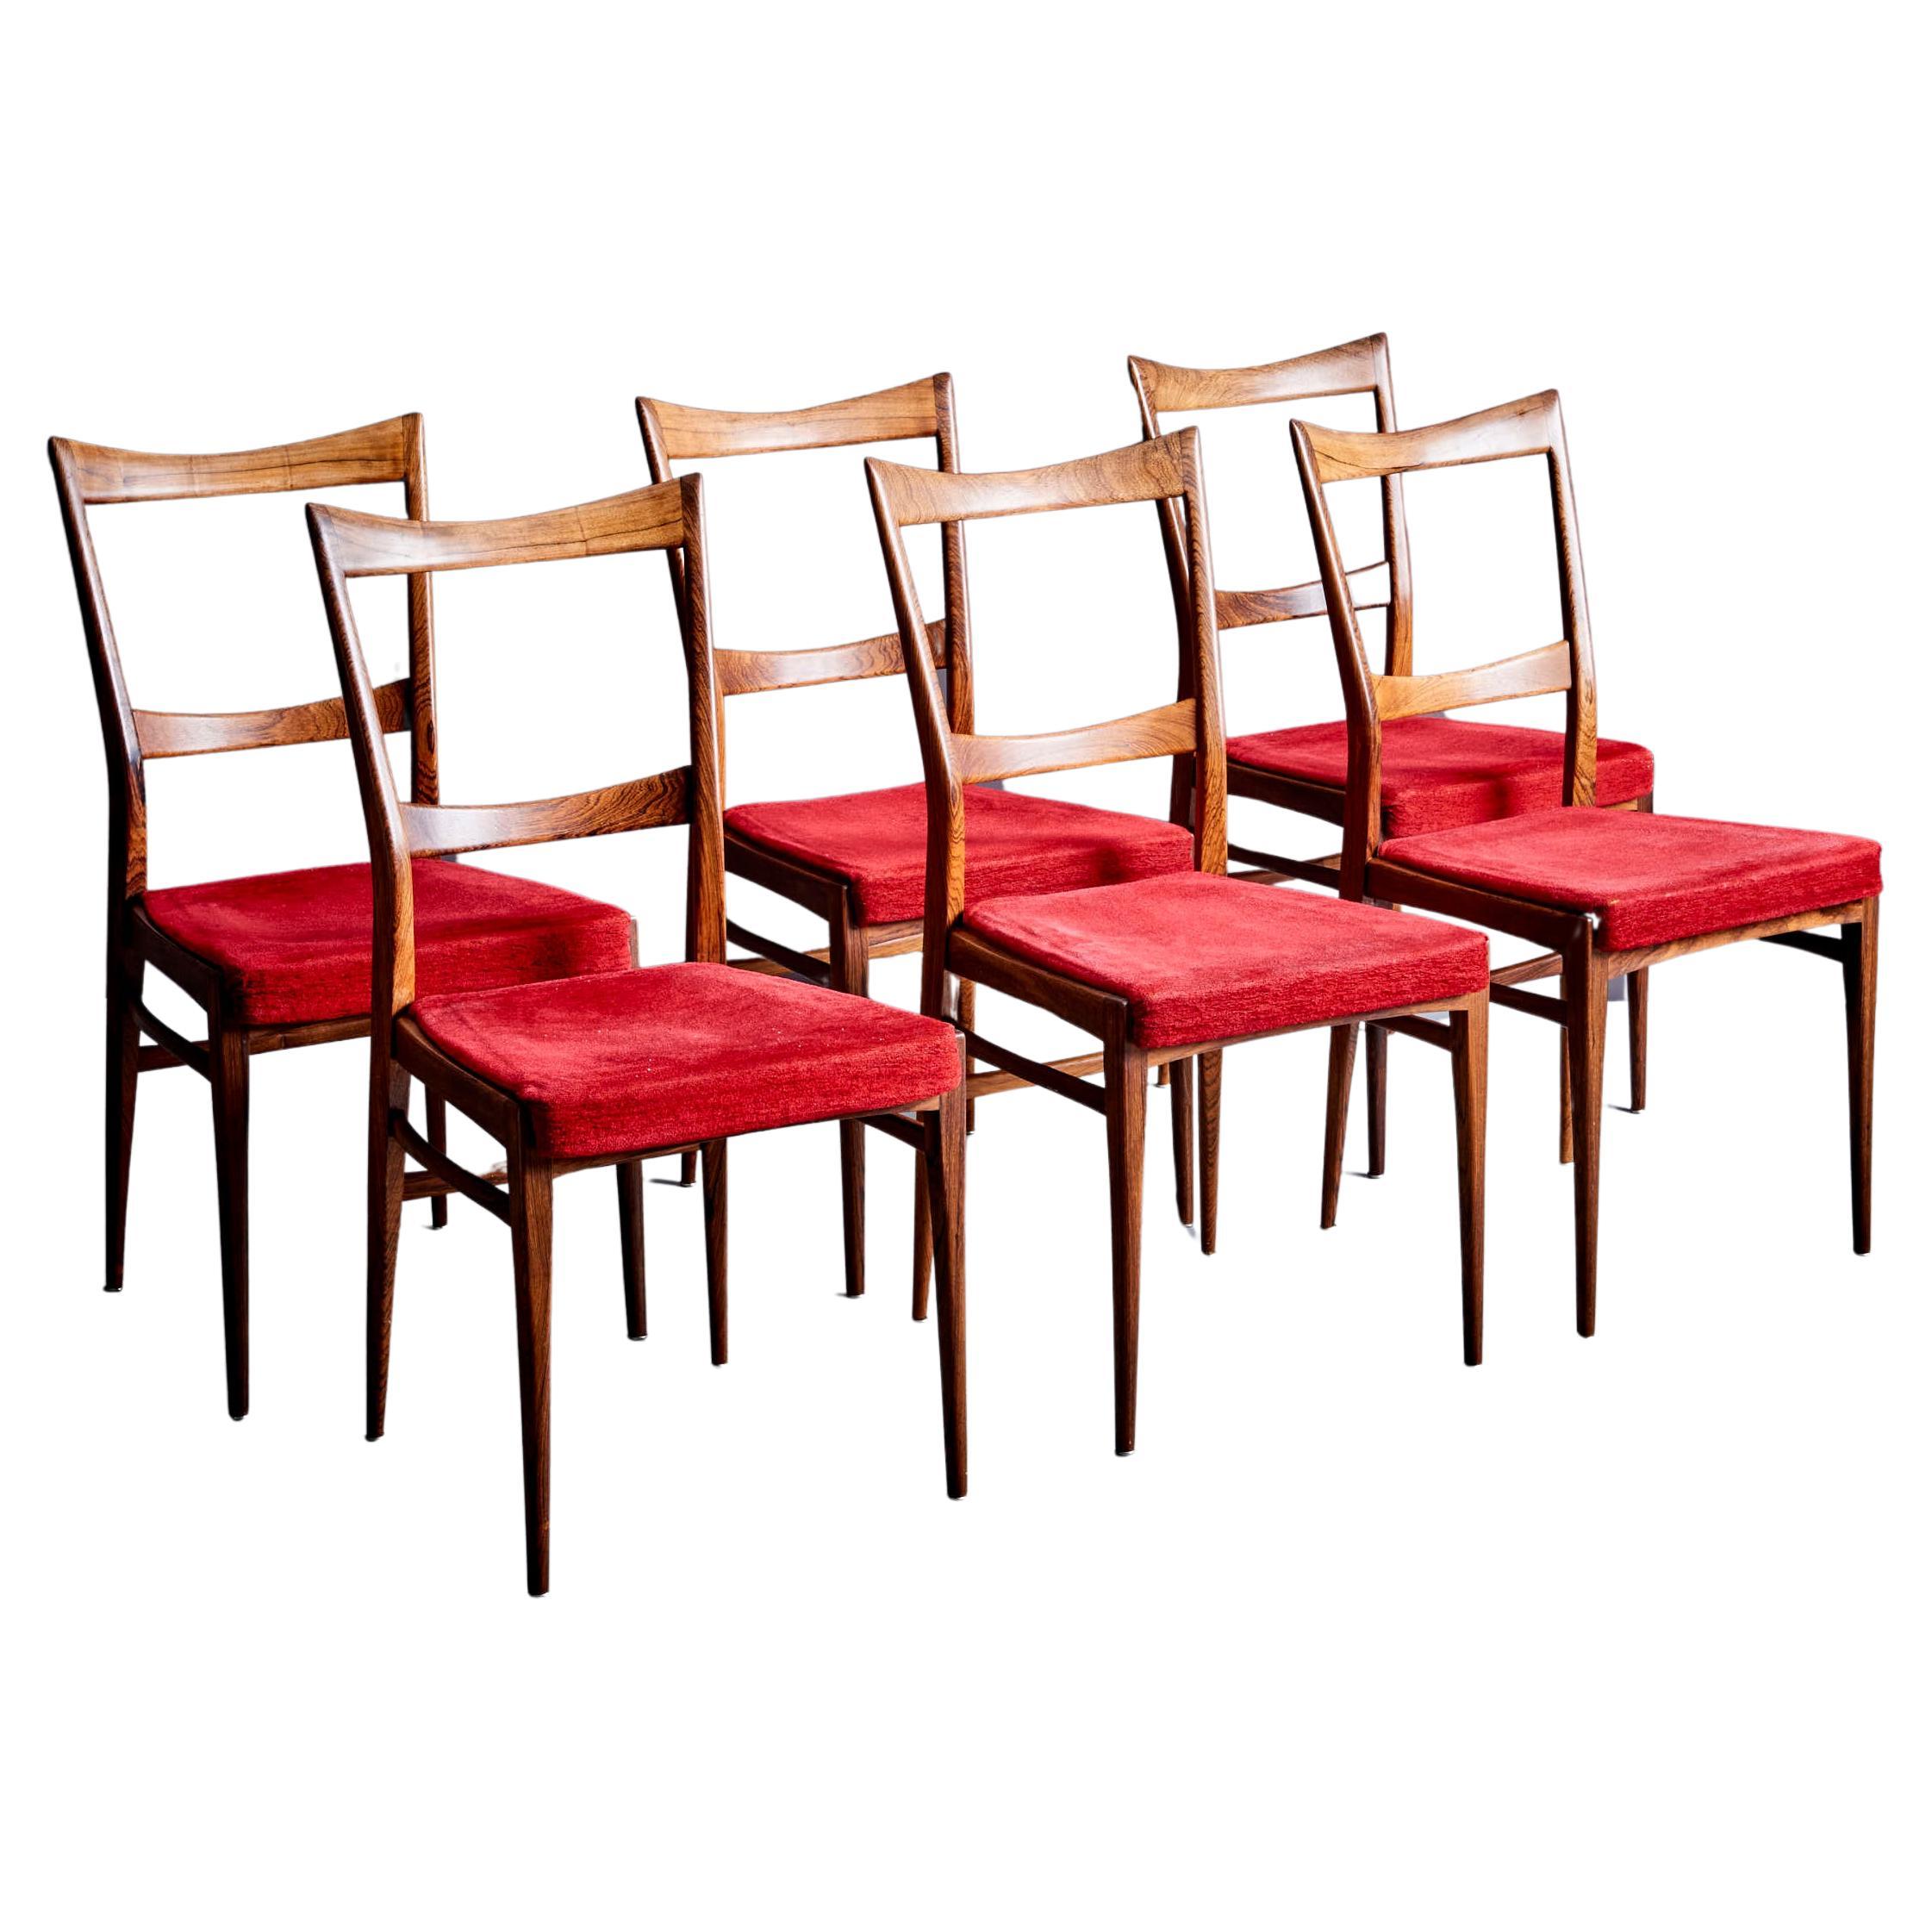 Set of 6 Rosewood Dining Chairs in the manner of Ico Parisi with red upholstery  For Sale